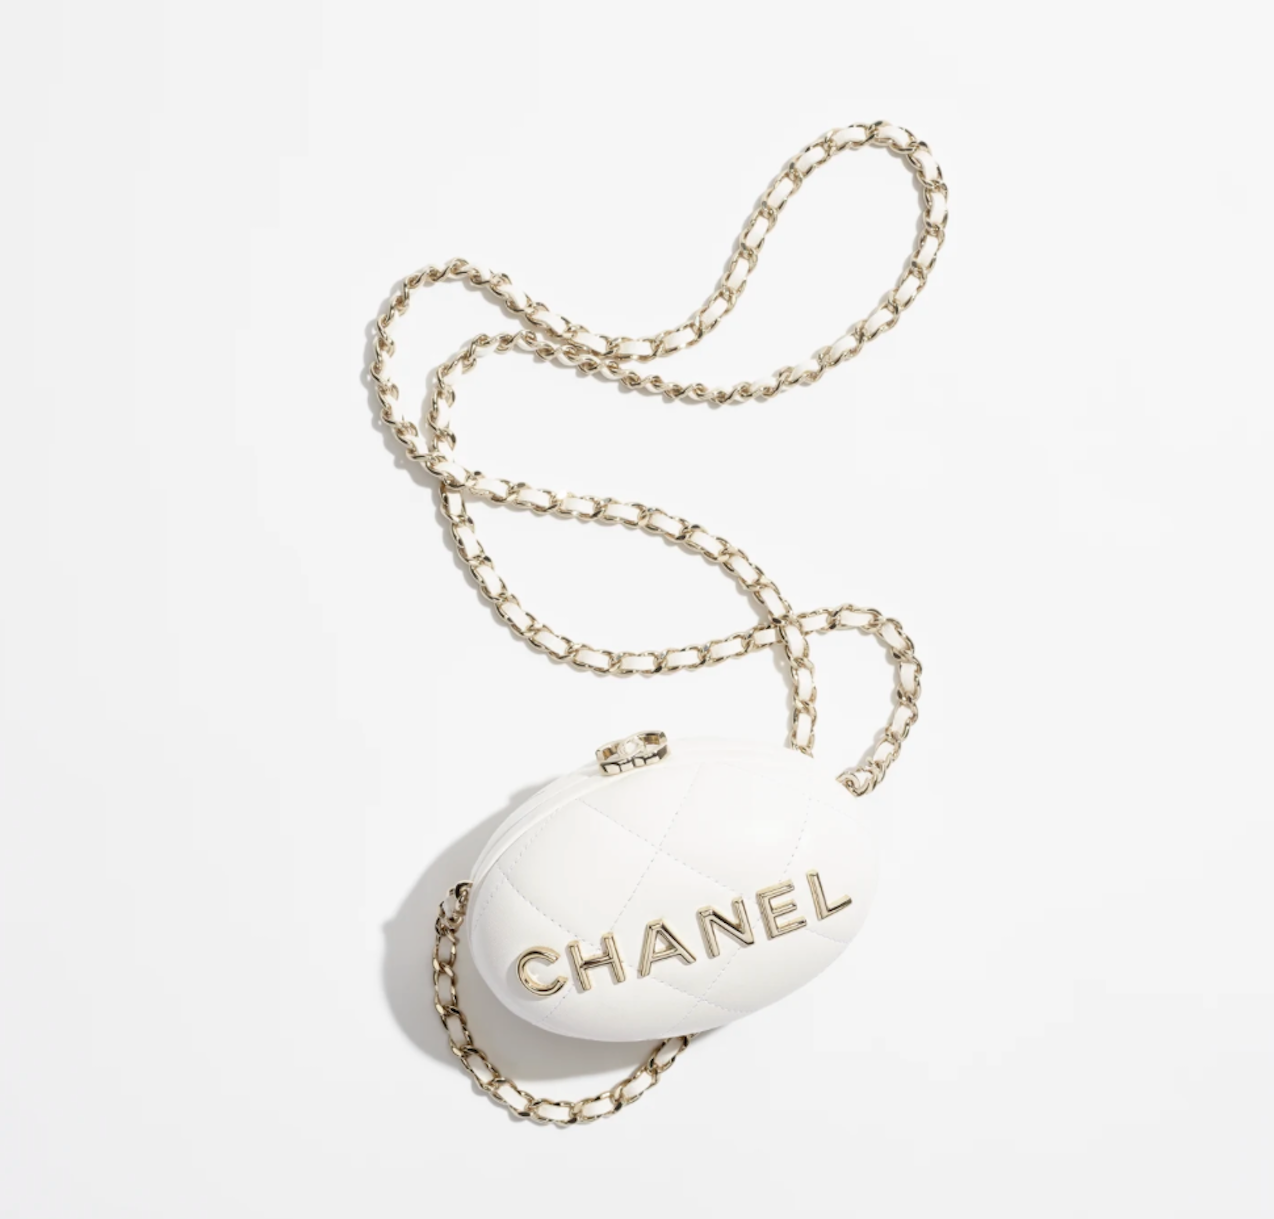 CHANEL BAGS & WALLETS : $5K-10K$ / TAKE YOUR PICK FROM THE CHANEL